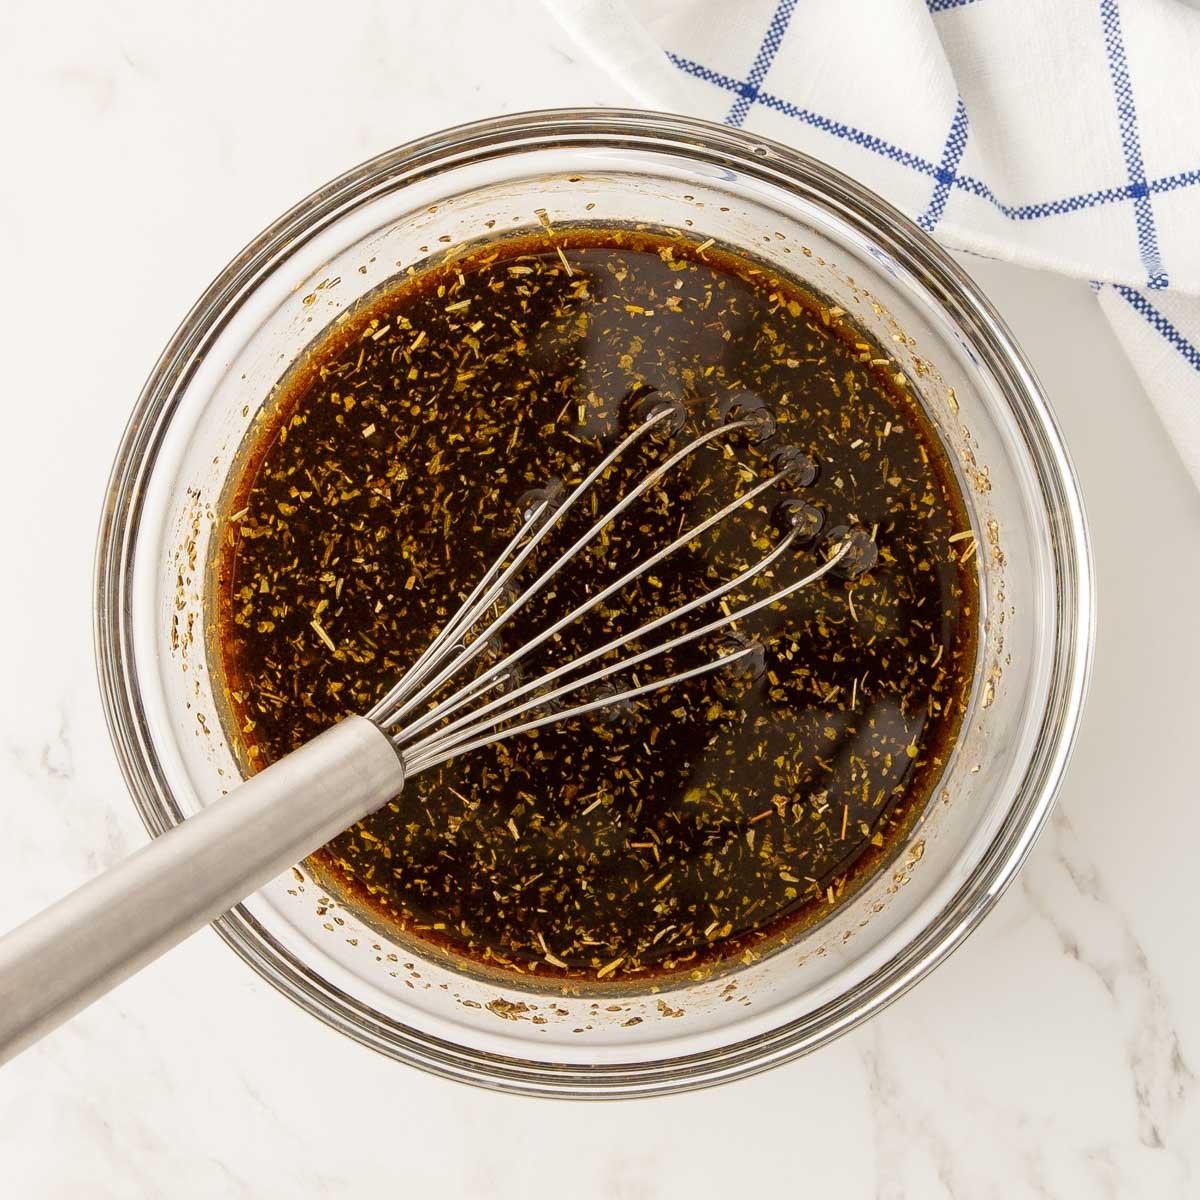 Overhead view of balsamic salad dressing in a bowl with a whisk.